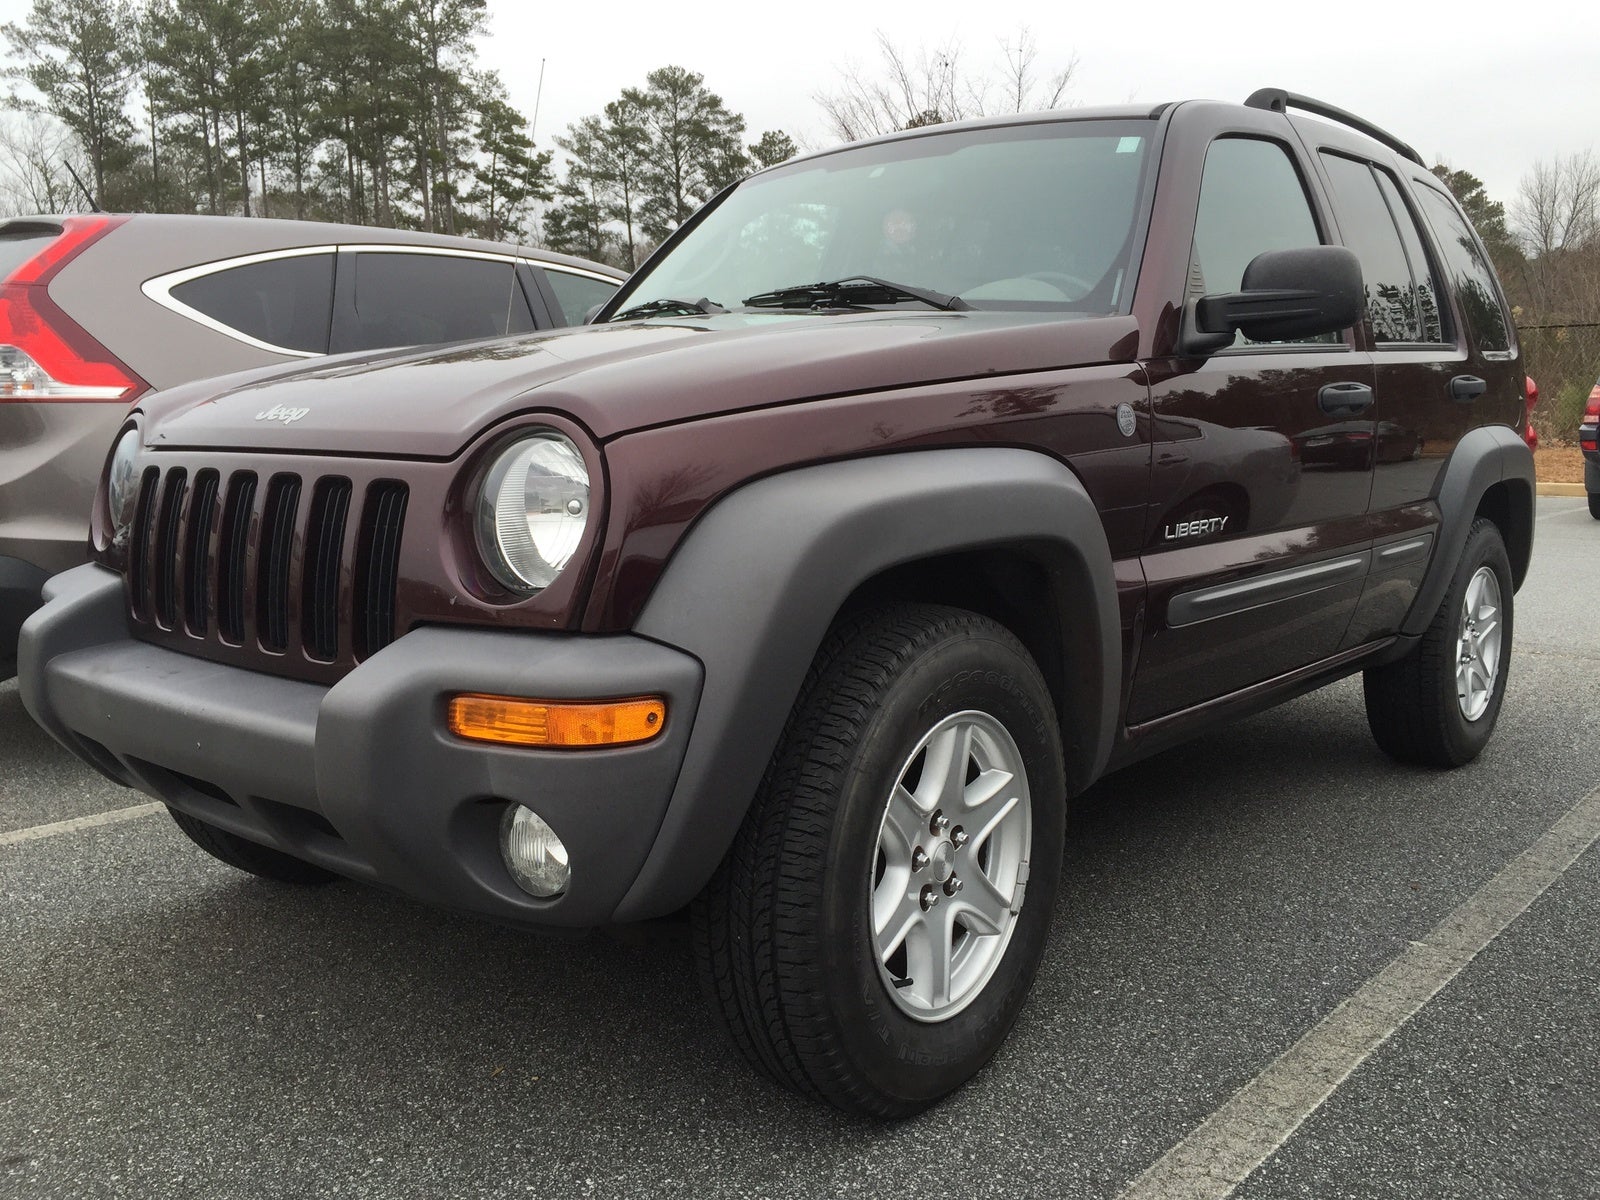 2004 Jeep Liberty Overview CarGurus